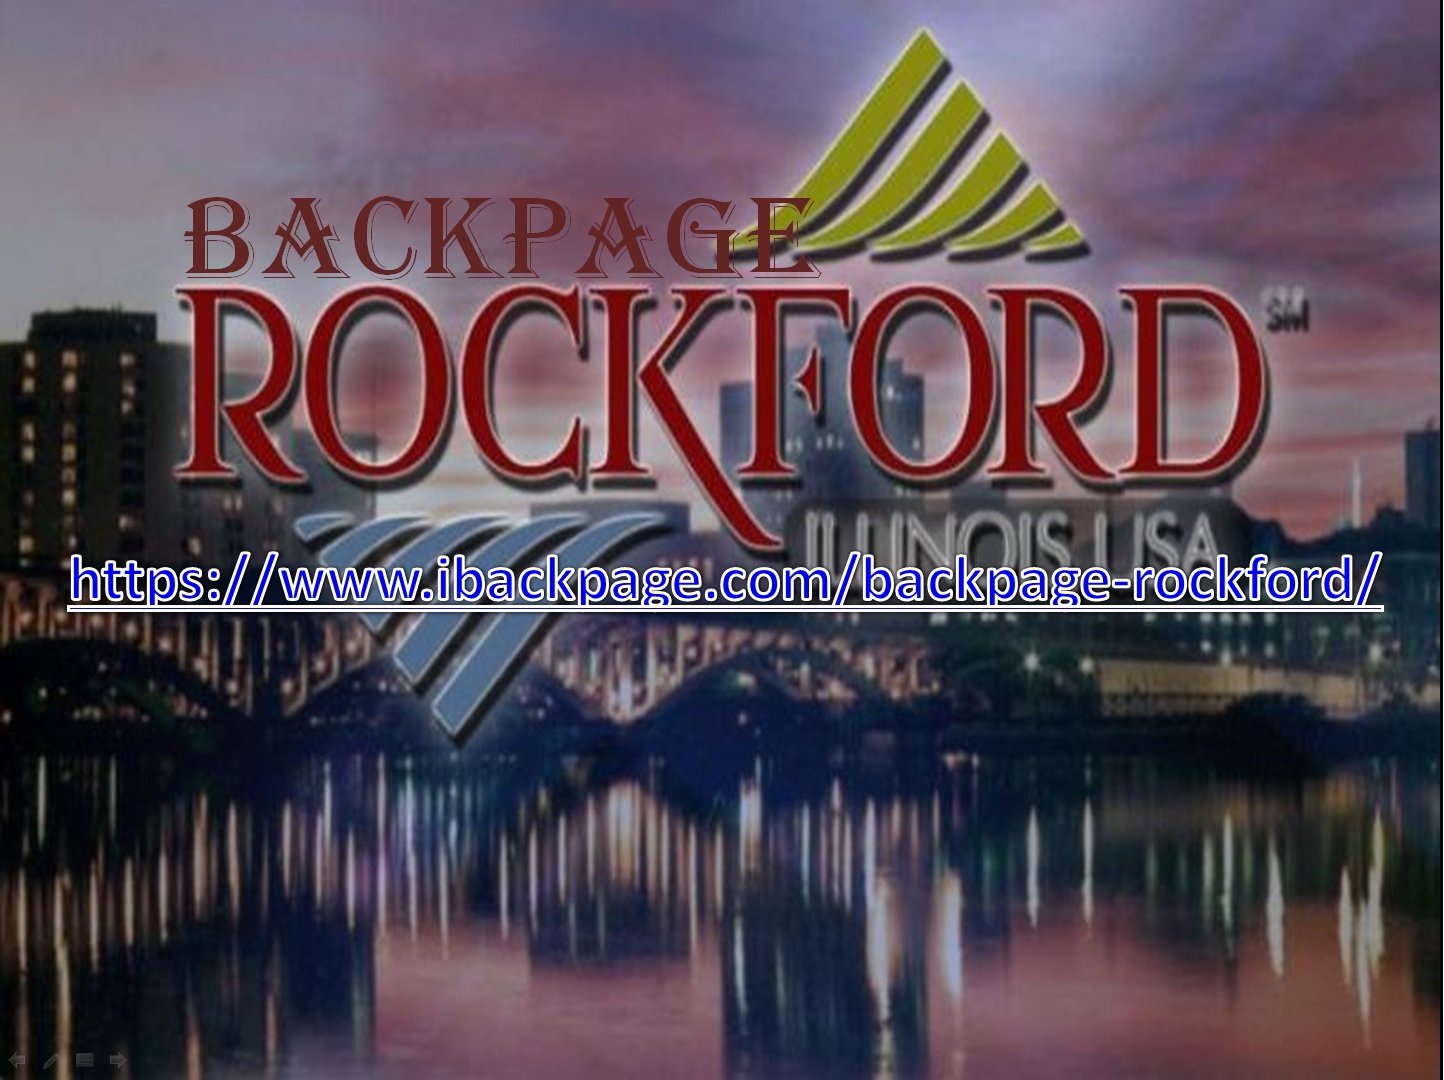 Backpage Rockford Site Similar to Backpage Alternative to Backpage If you a...